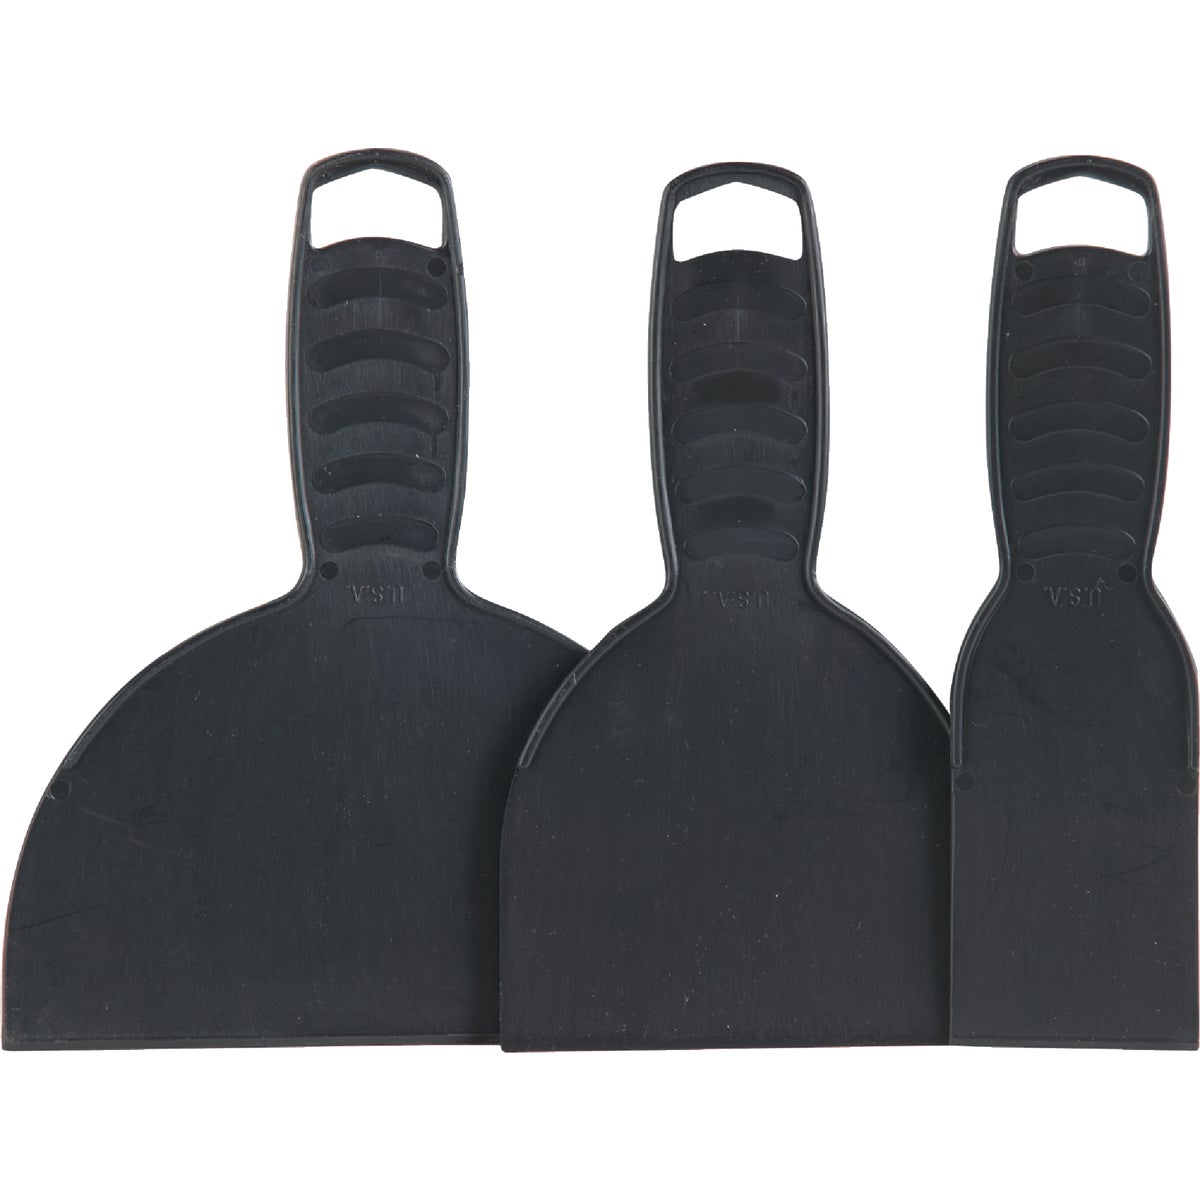 Item 786577, Lightweight polypropylene tools for spreading or scraping compounds.